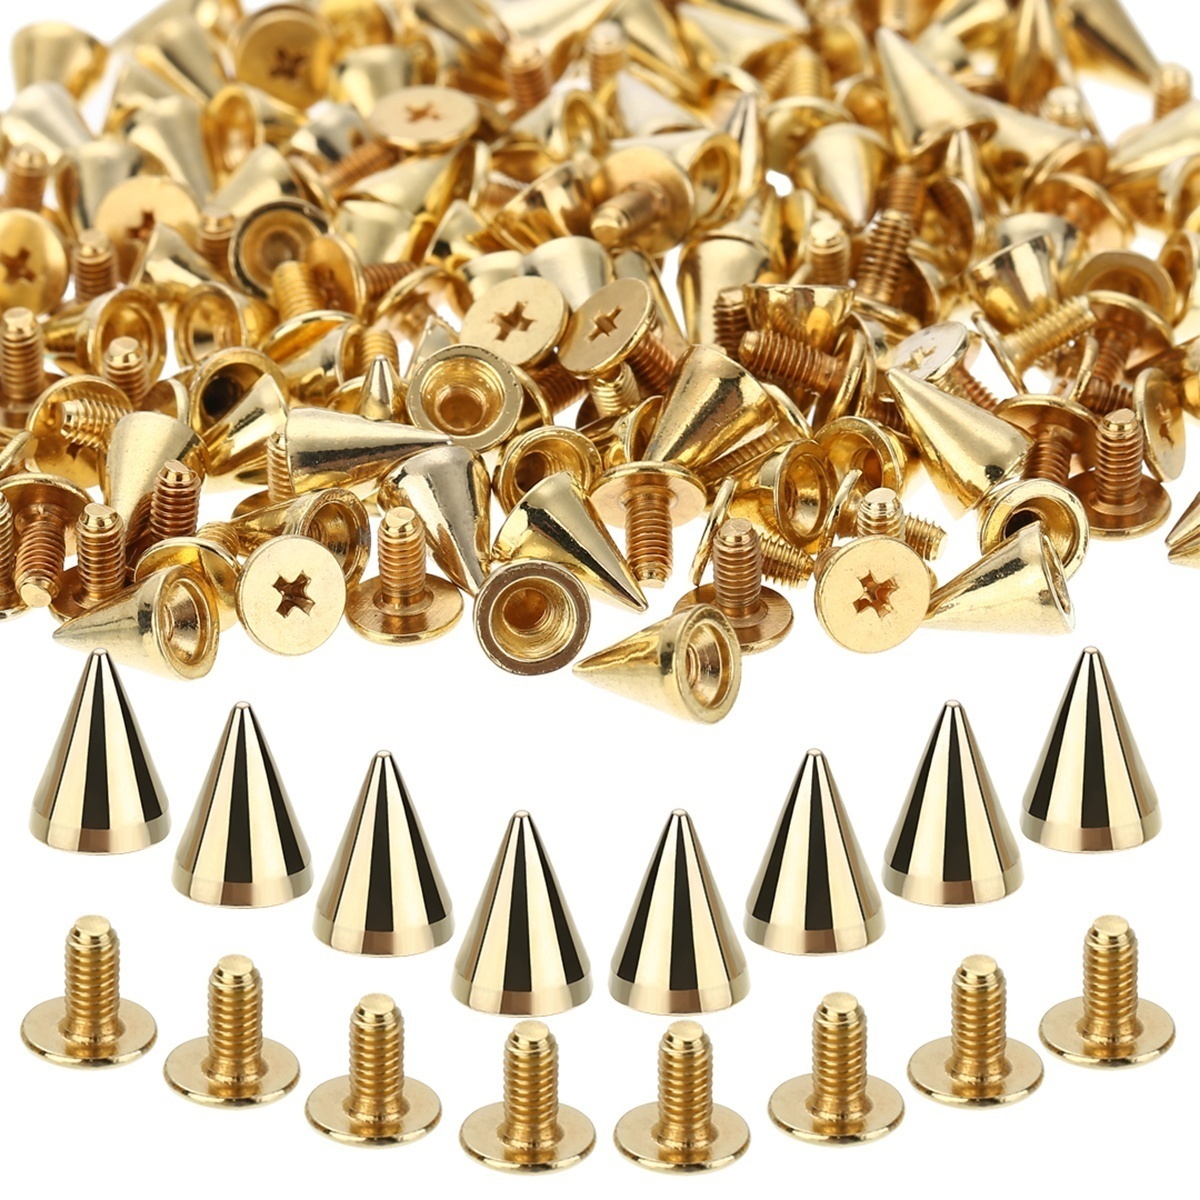 100pcs Black/Gold/Silver Cone Studs And Spikes DIY Craft Cool Punk Garment  Rivets For Clothes Bag Shoes Leather DIY Handcraft